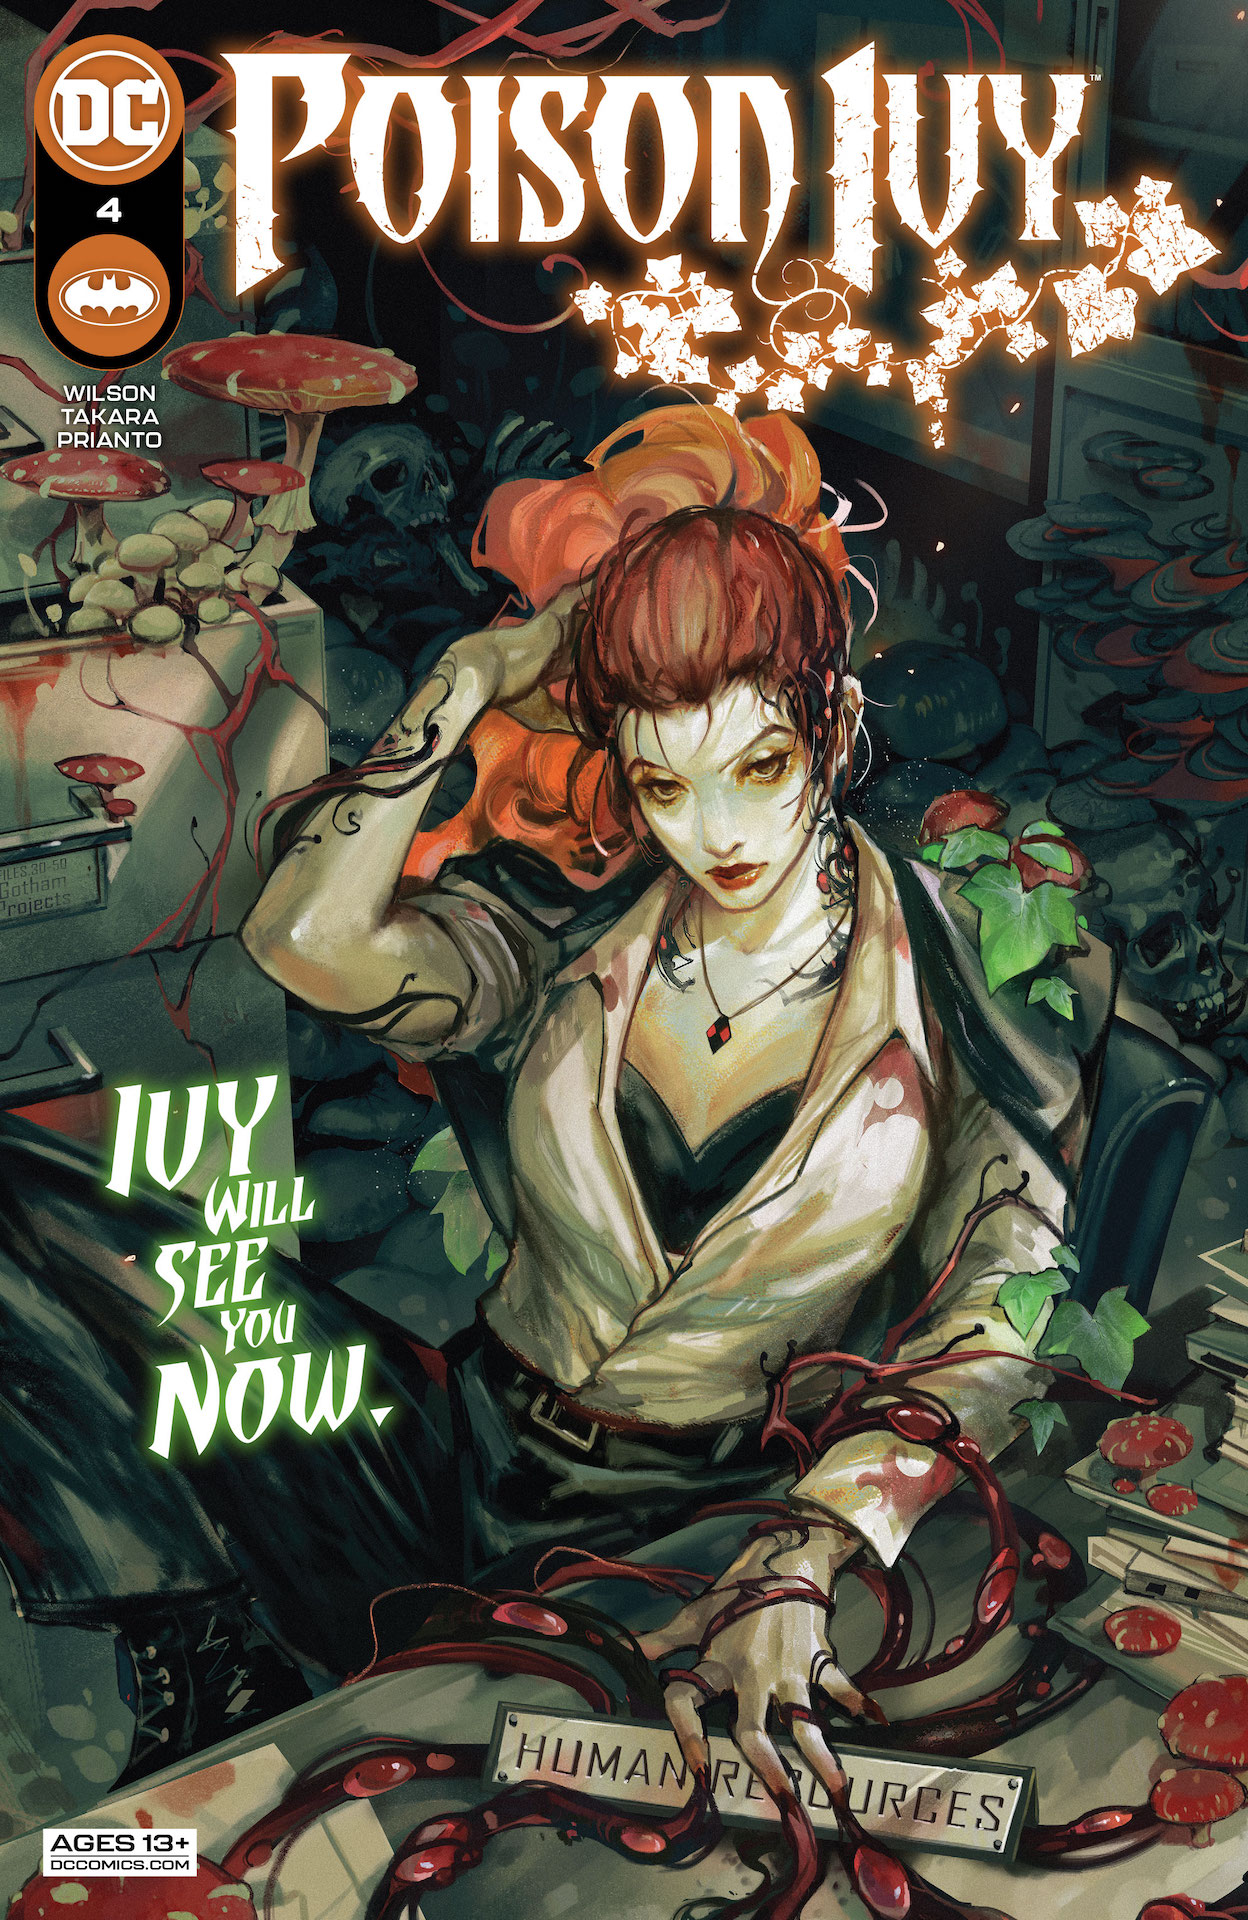 DC Preview: Poison Ivy #4